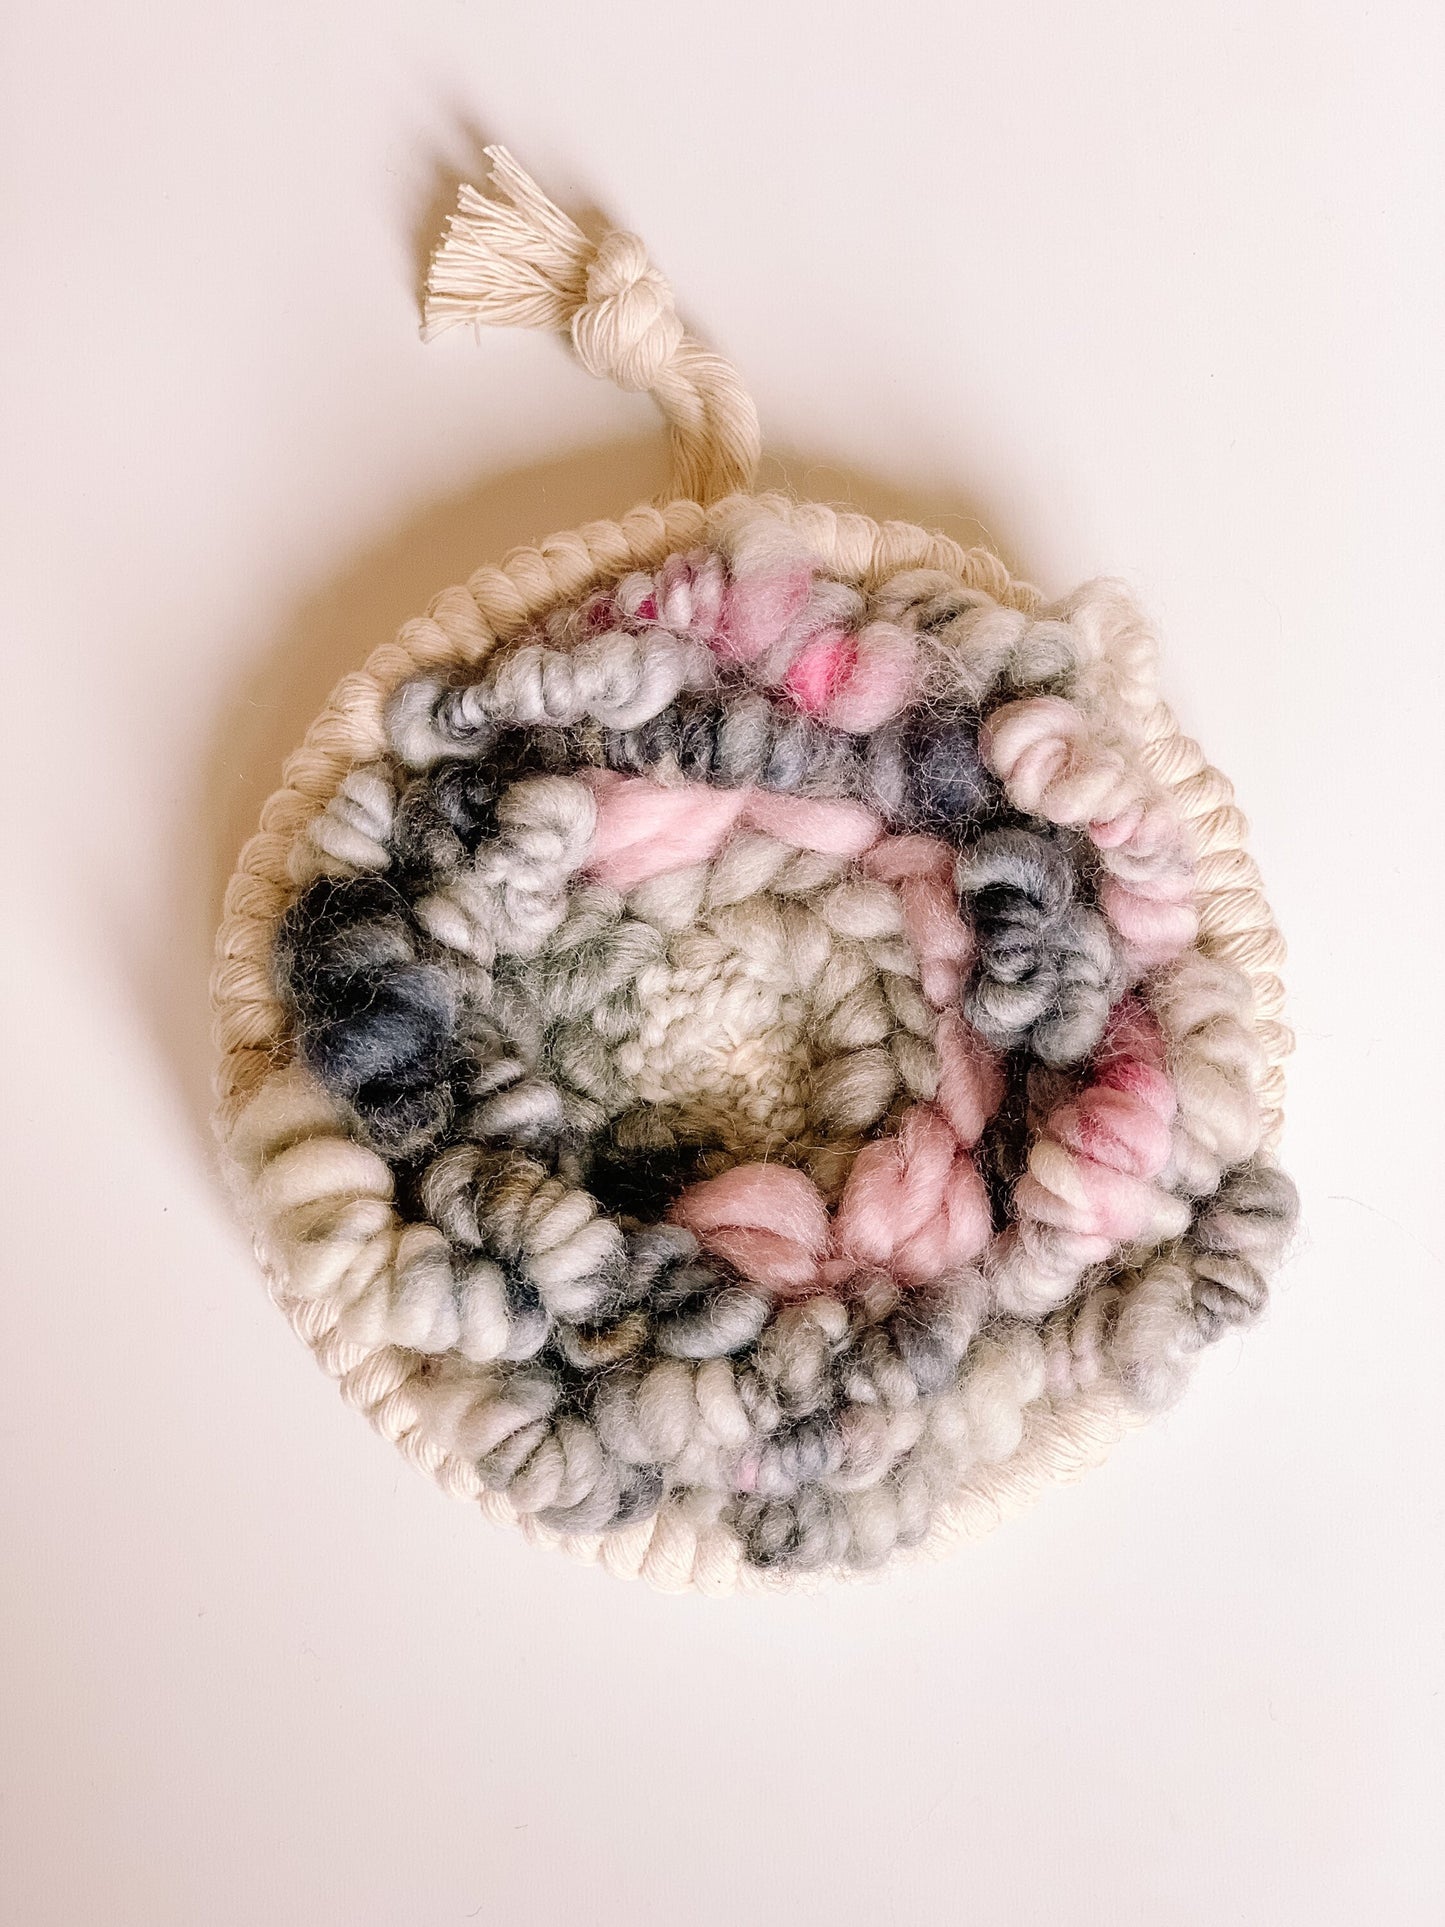 Woven round wall hanging